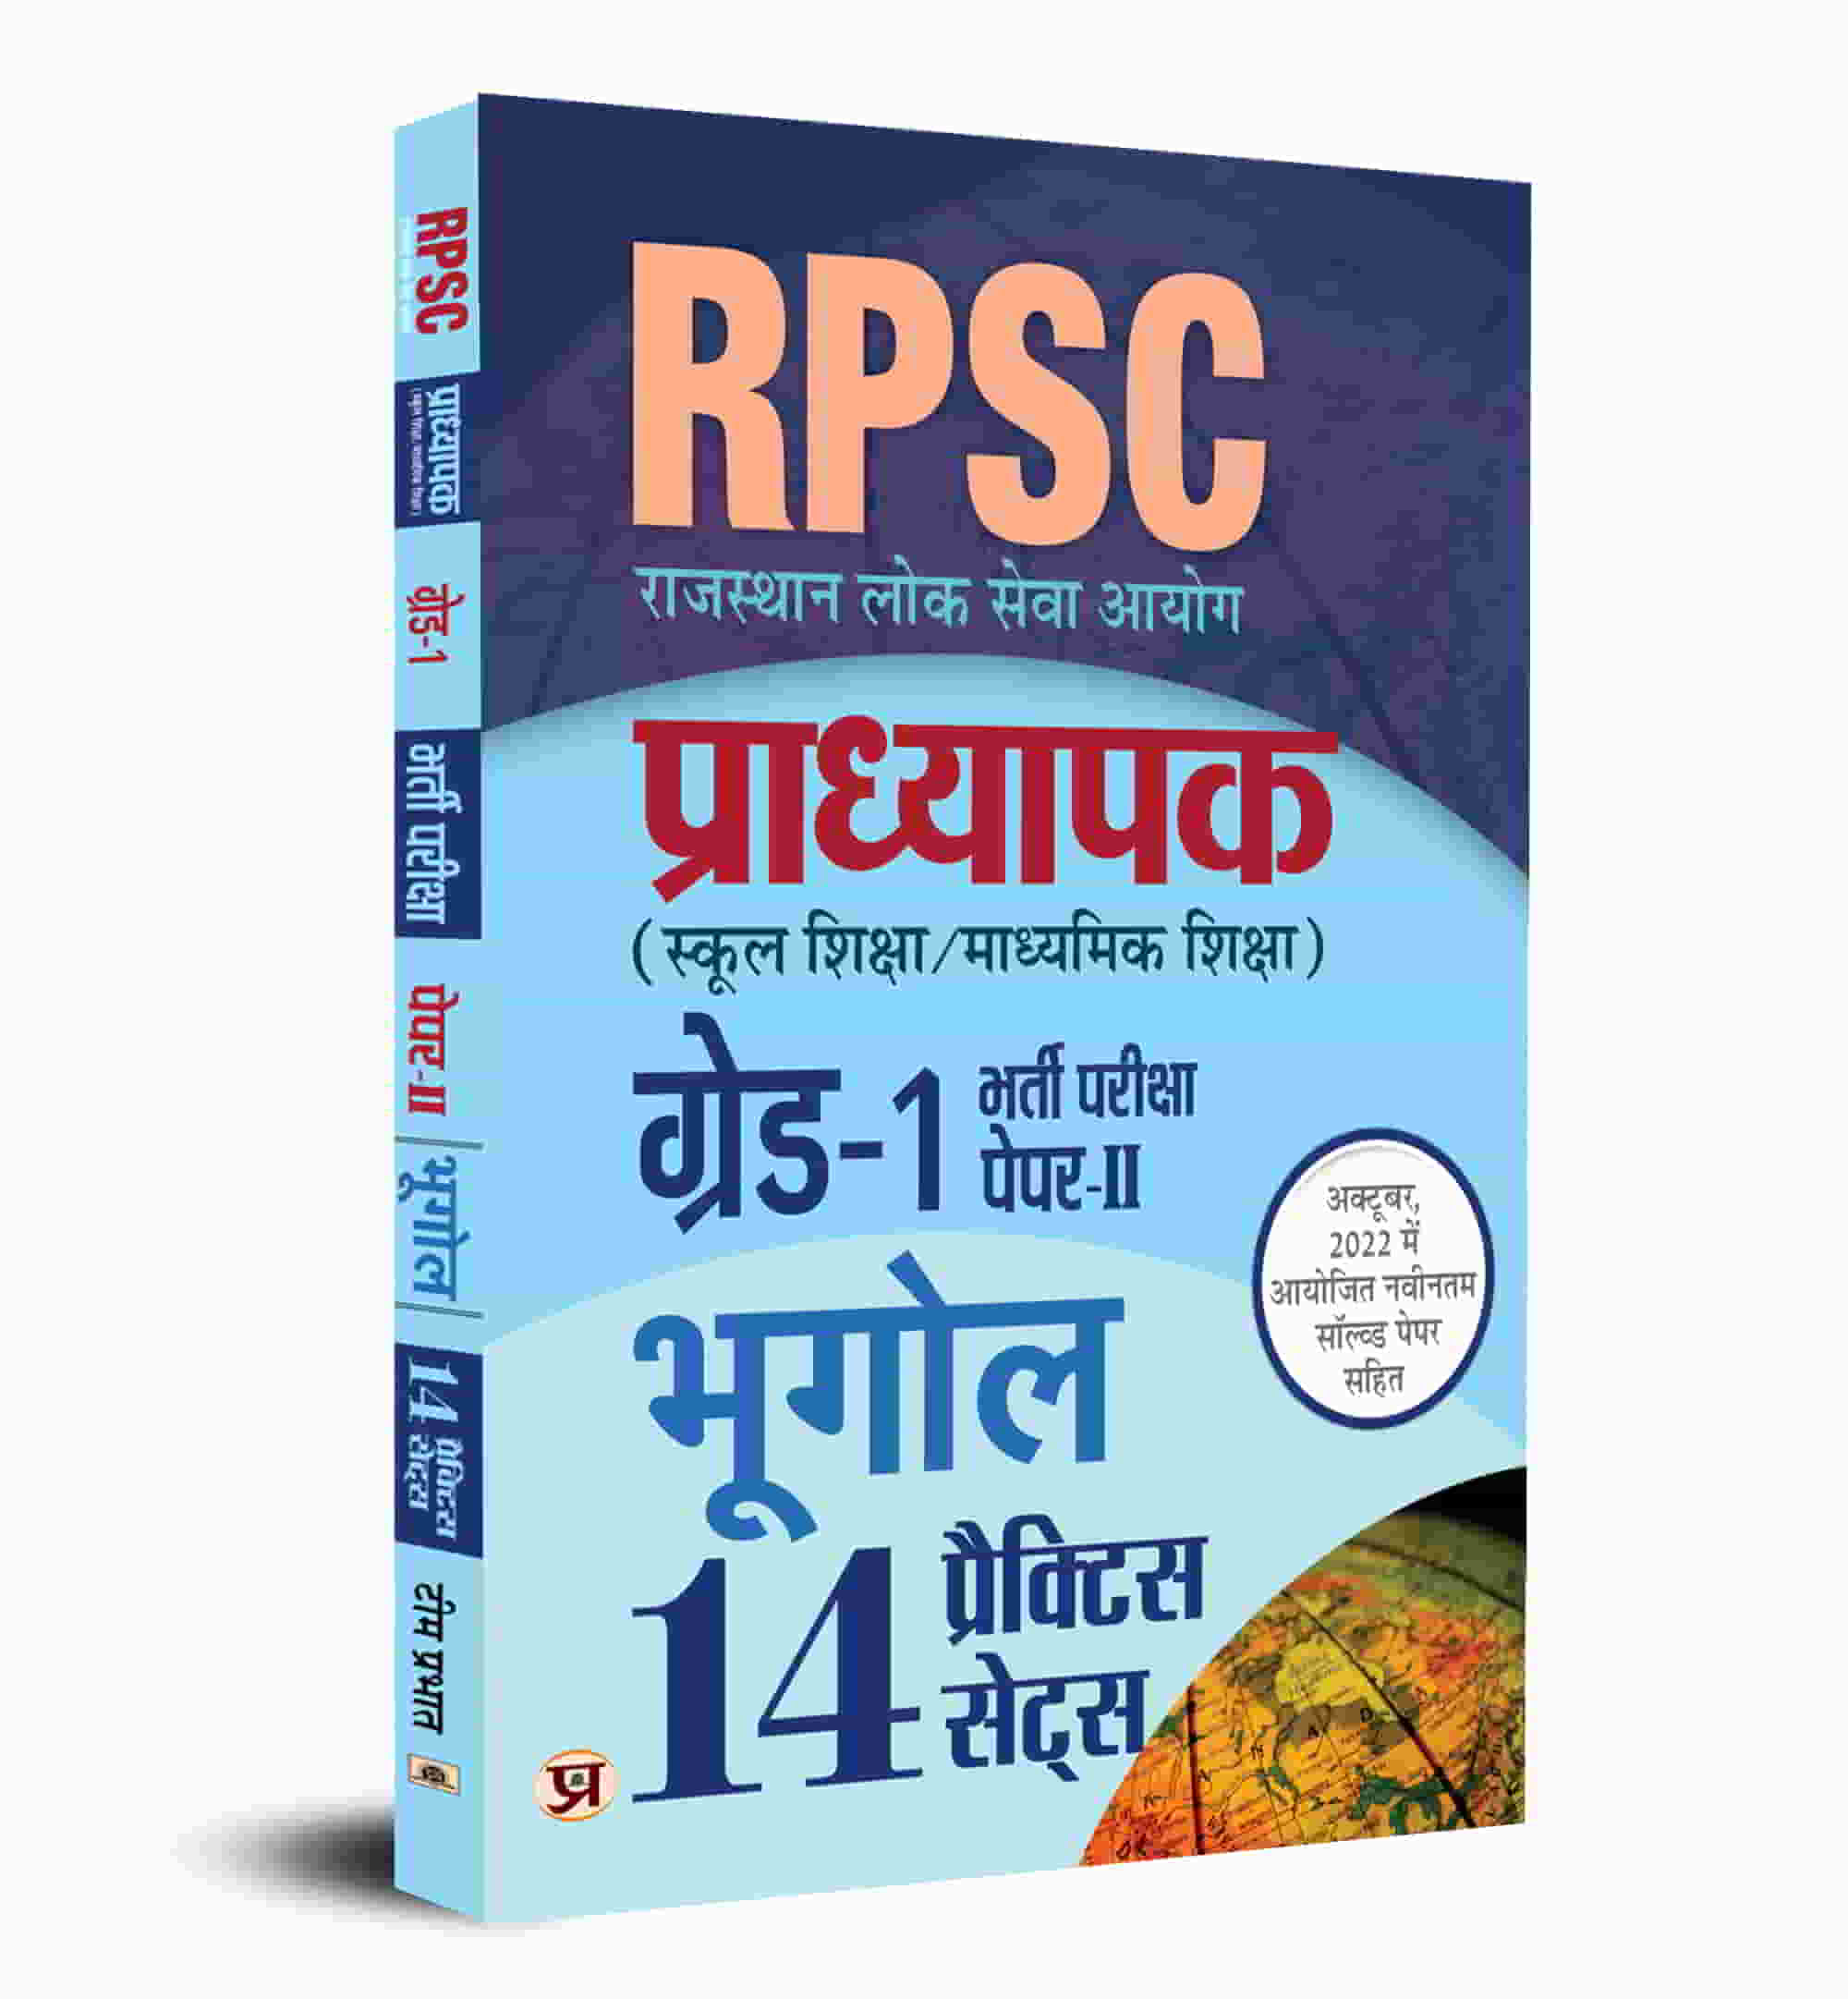 RPSC Professor School Education / Secondary Education Recruitment Exam (PAPER-II ) Subject Geography Grade - 1 14 Practice Sets Book In Hindi